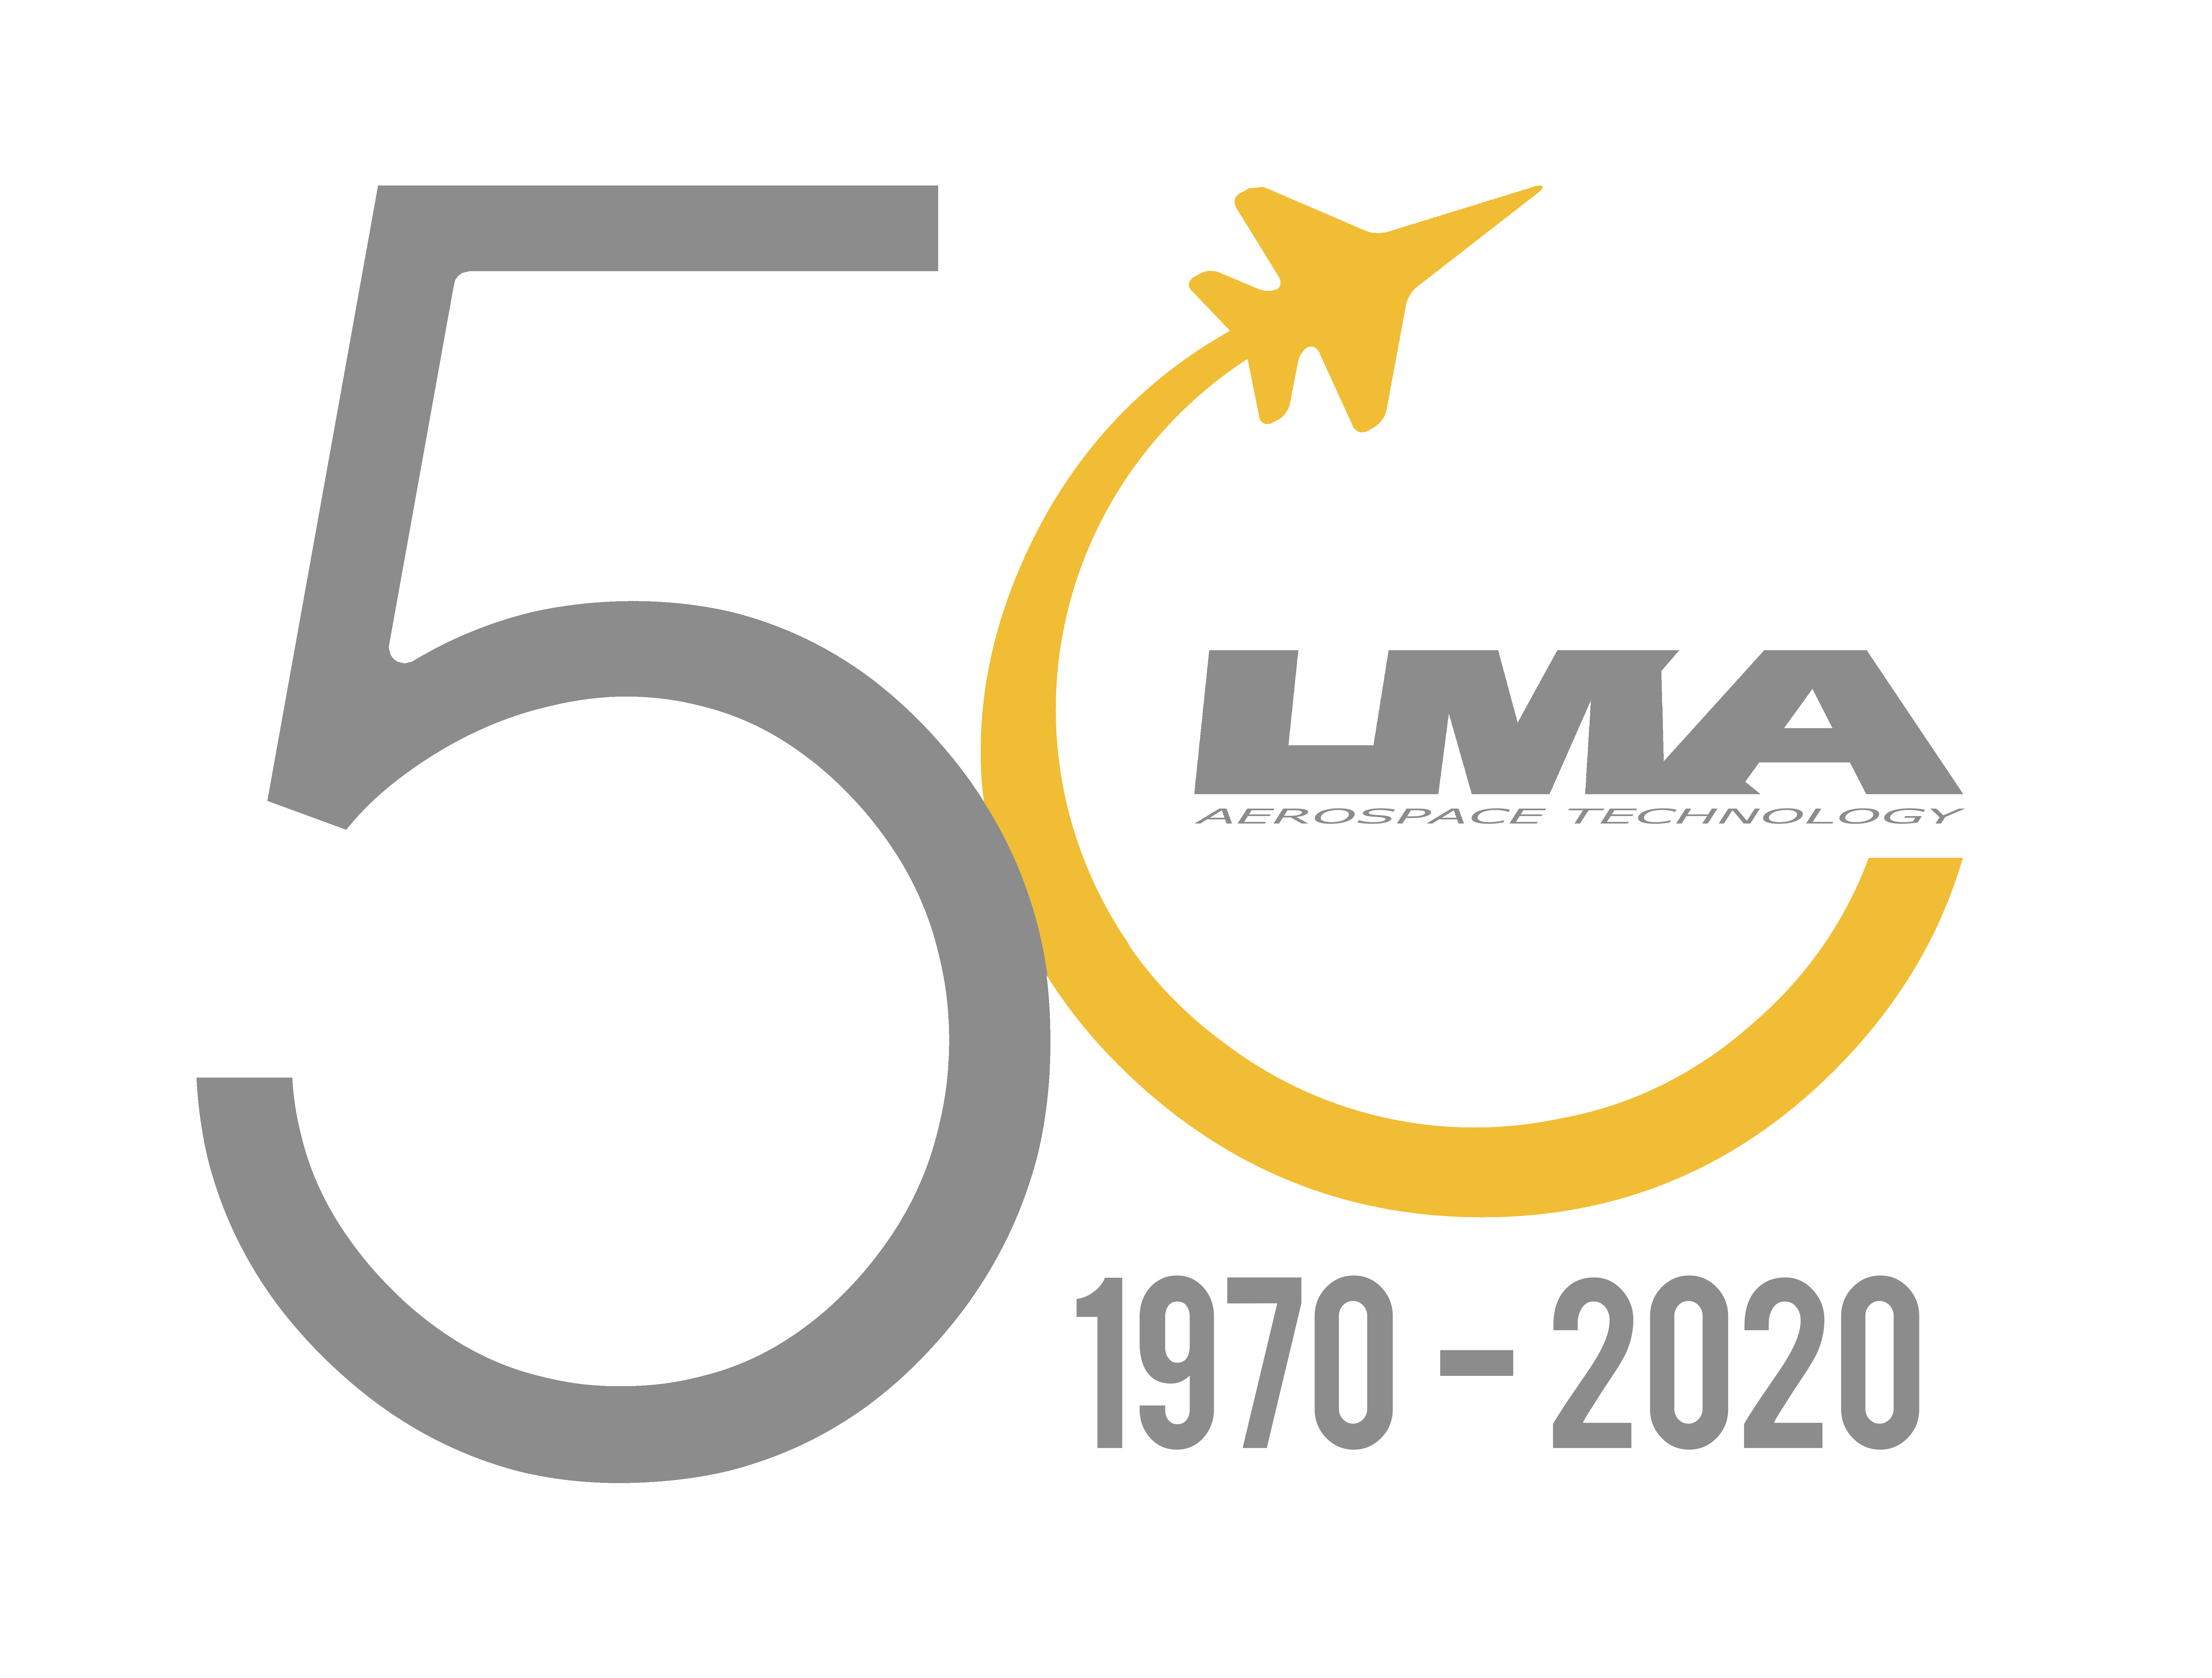 LMA: ITS FIRST 50 YEARS